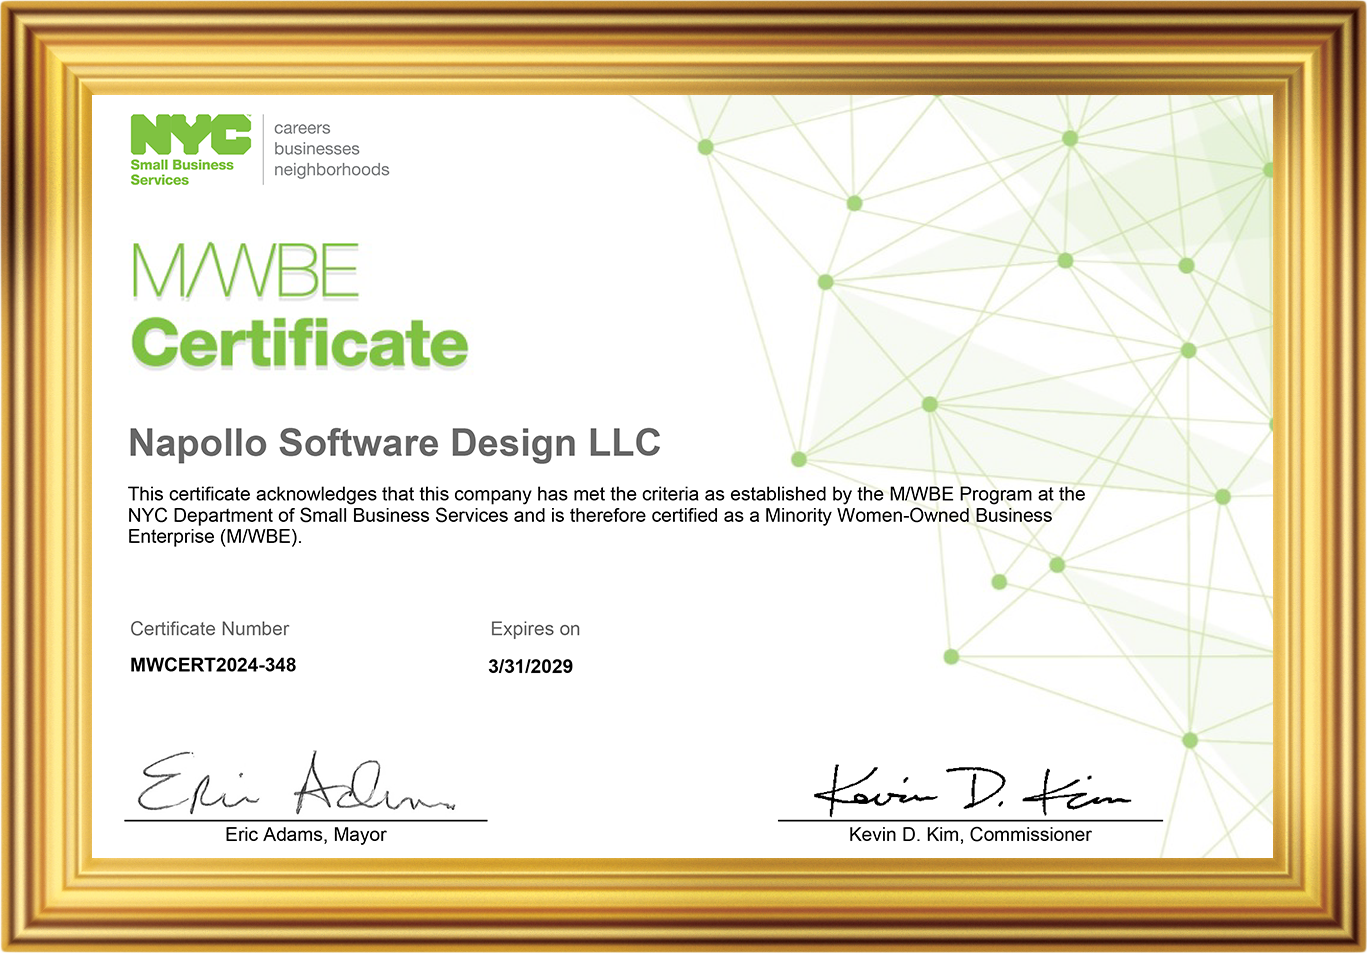 Certificate Frame 1.png 02